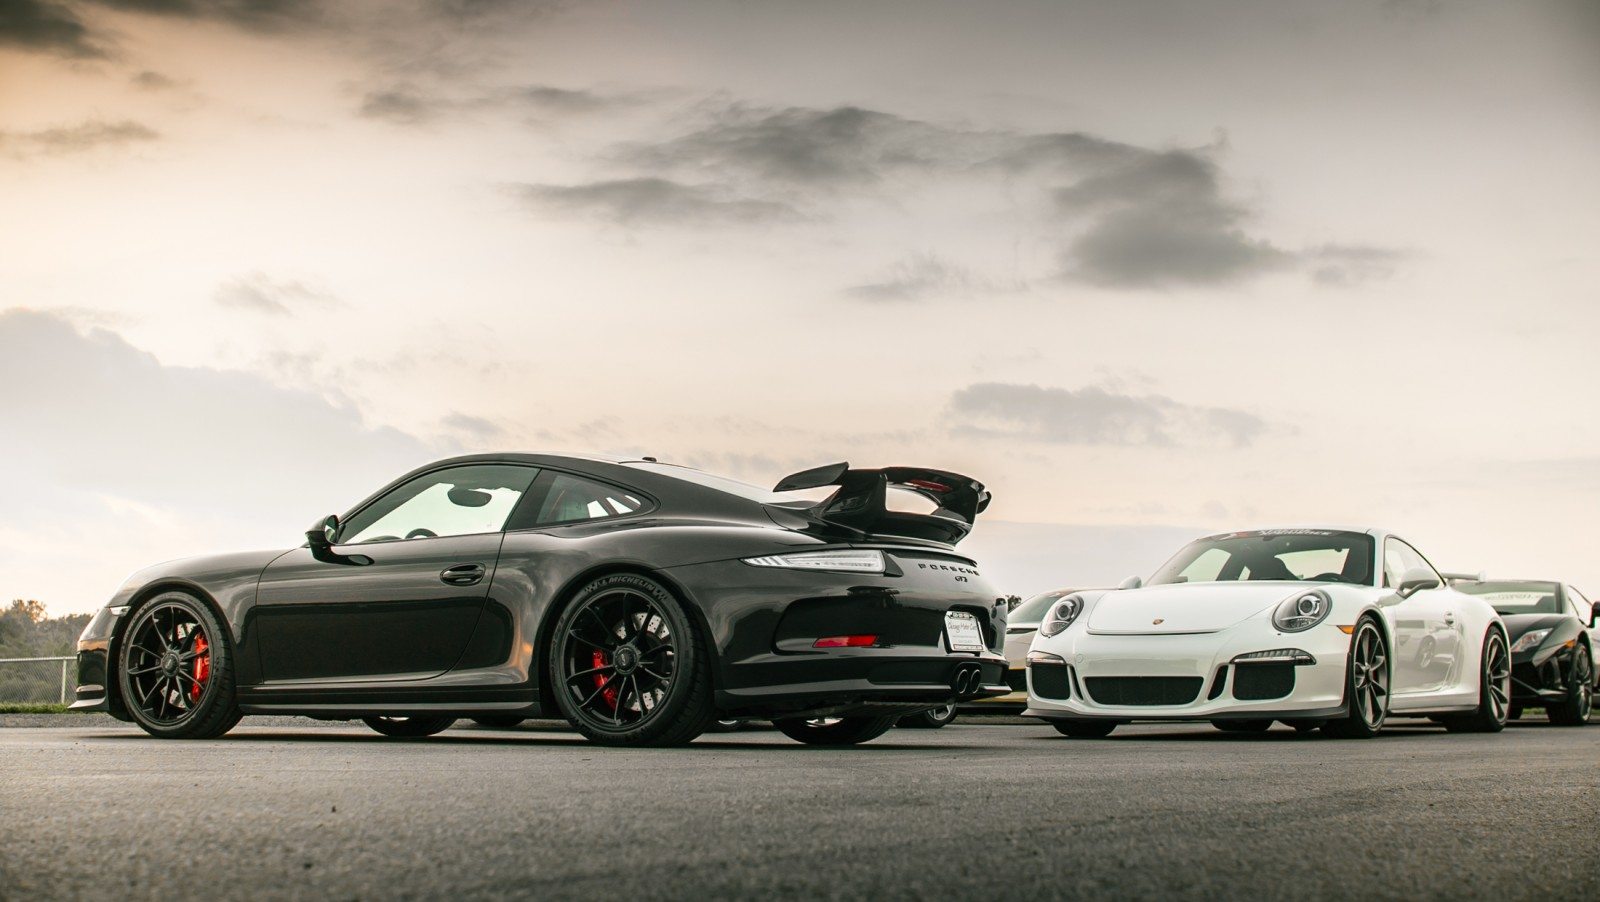 image xtreme xperience Porsche 911 GT3s in black and white at the track